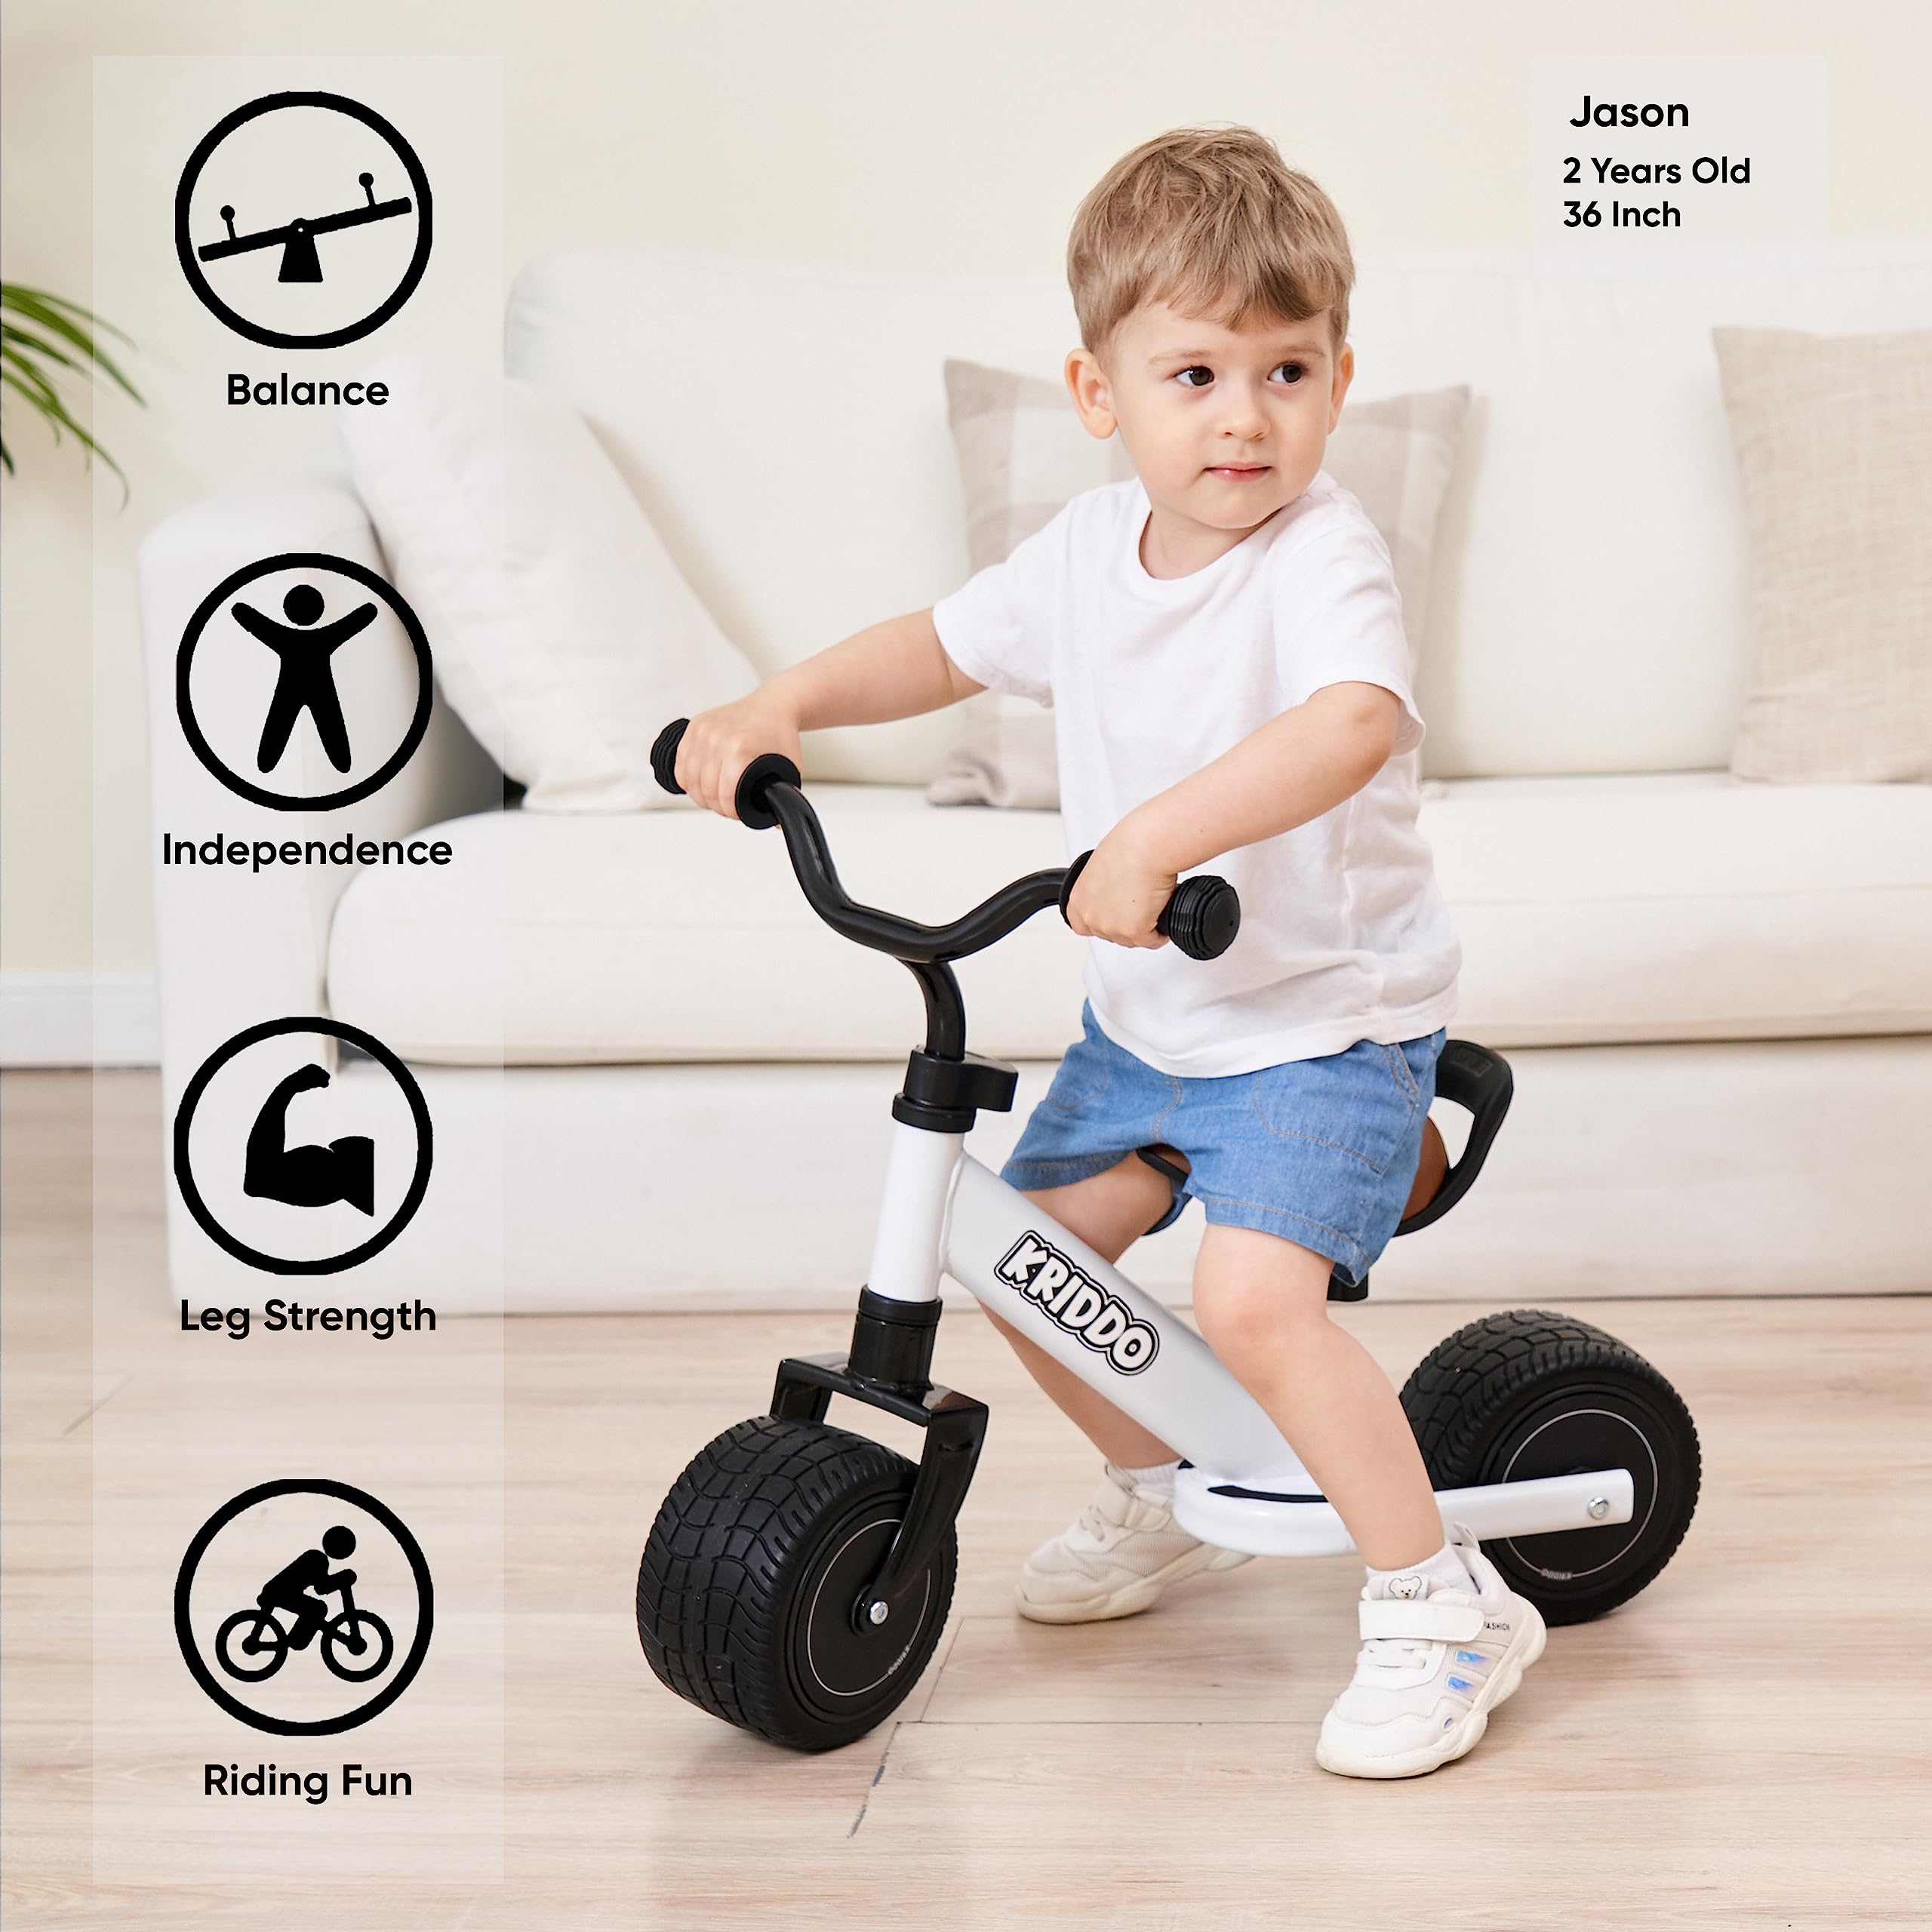 KRIDDO Baby Balance Bike 1-3 Year Old, Mini Cruiser Bike for One Year Old First Birthday Gifts Baby Toys 12 Months to 3 Year Old, White